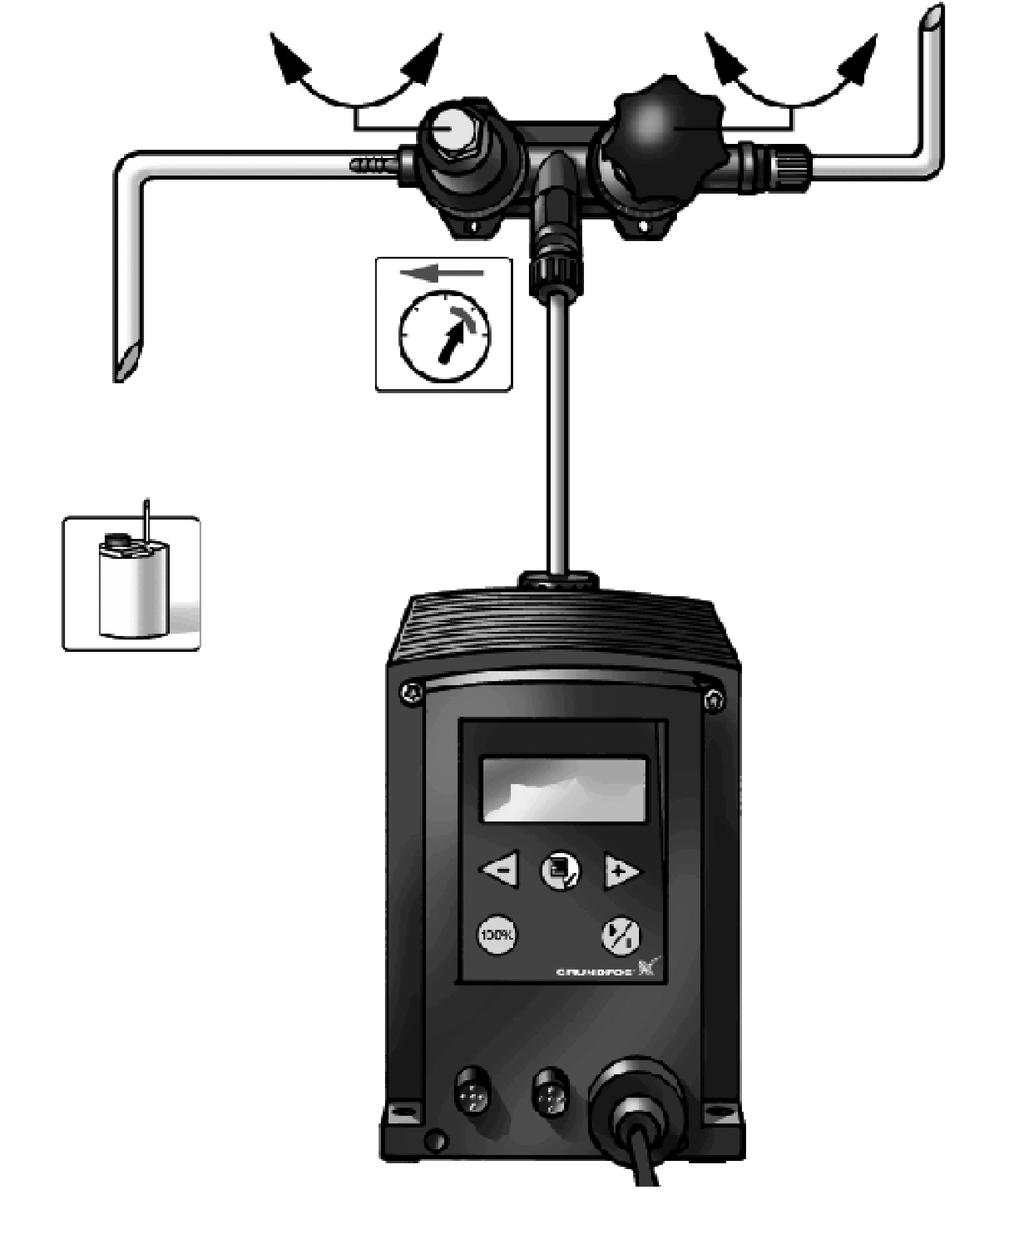 The outlet of the other valve is connected to the tank, and the valve thus functions as a pressure relief valve or a safety valve protecting the pumps and the discharge tube against excessive